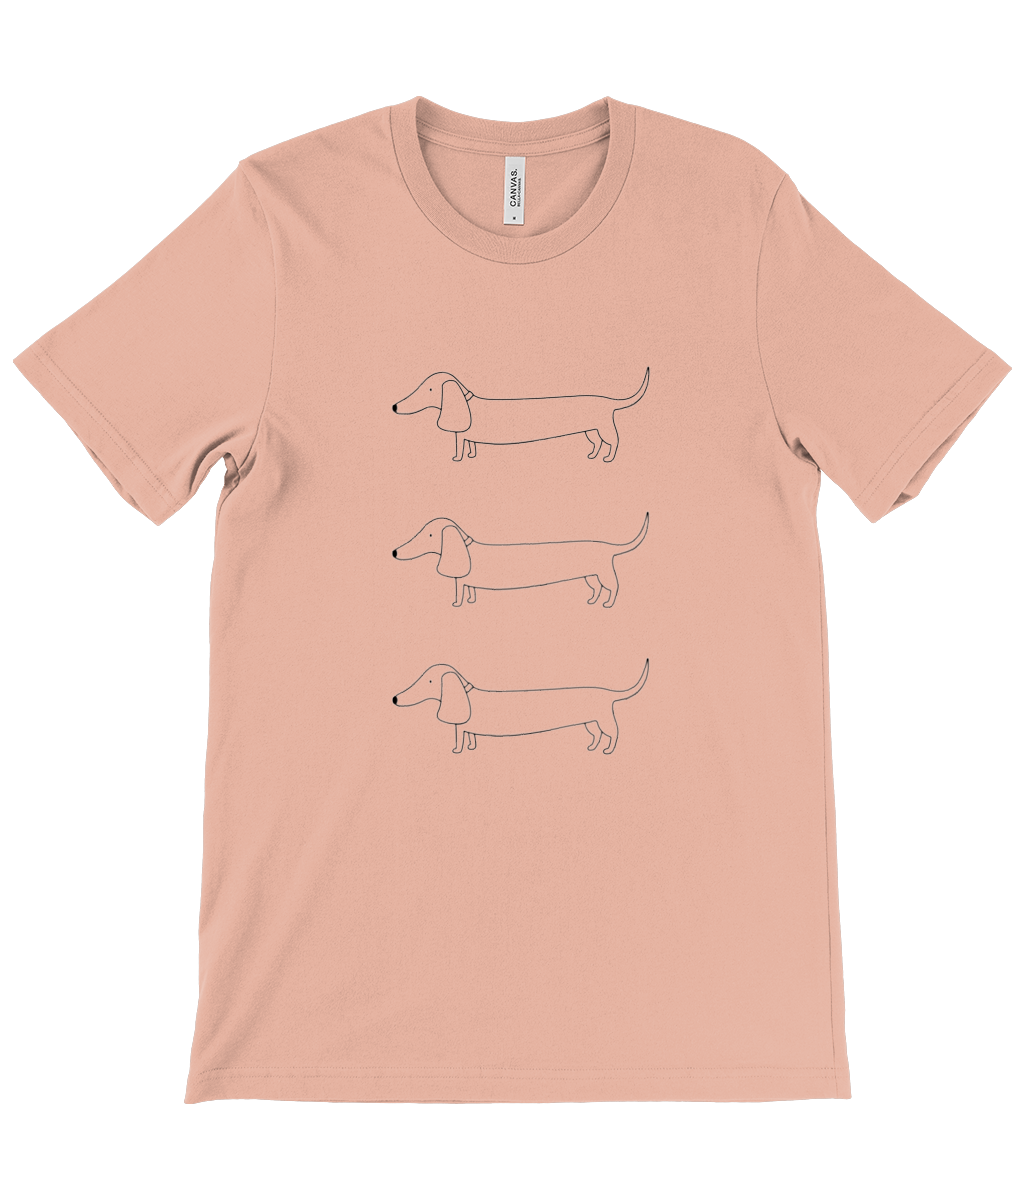 Sunset unisex t-shirt. Design on front shows 3 outline drawings of sausage dogs, in a column one above the other.